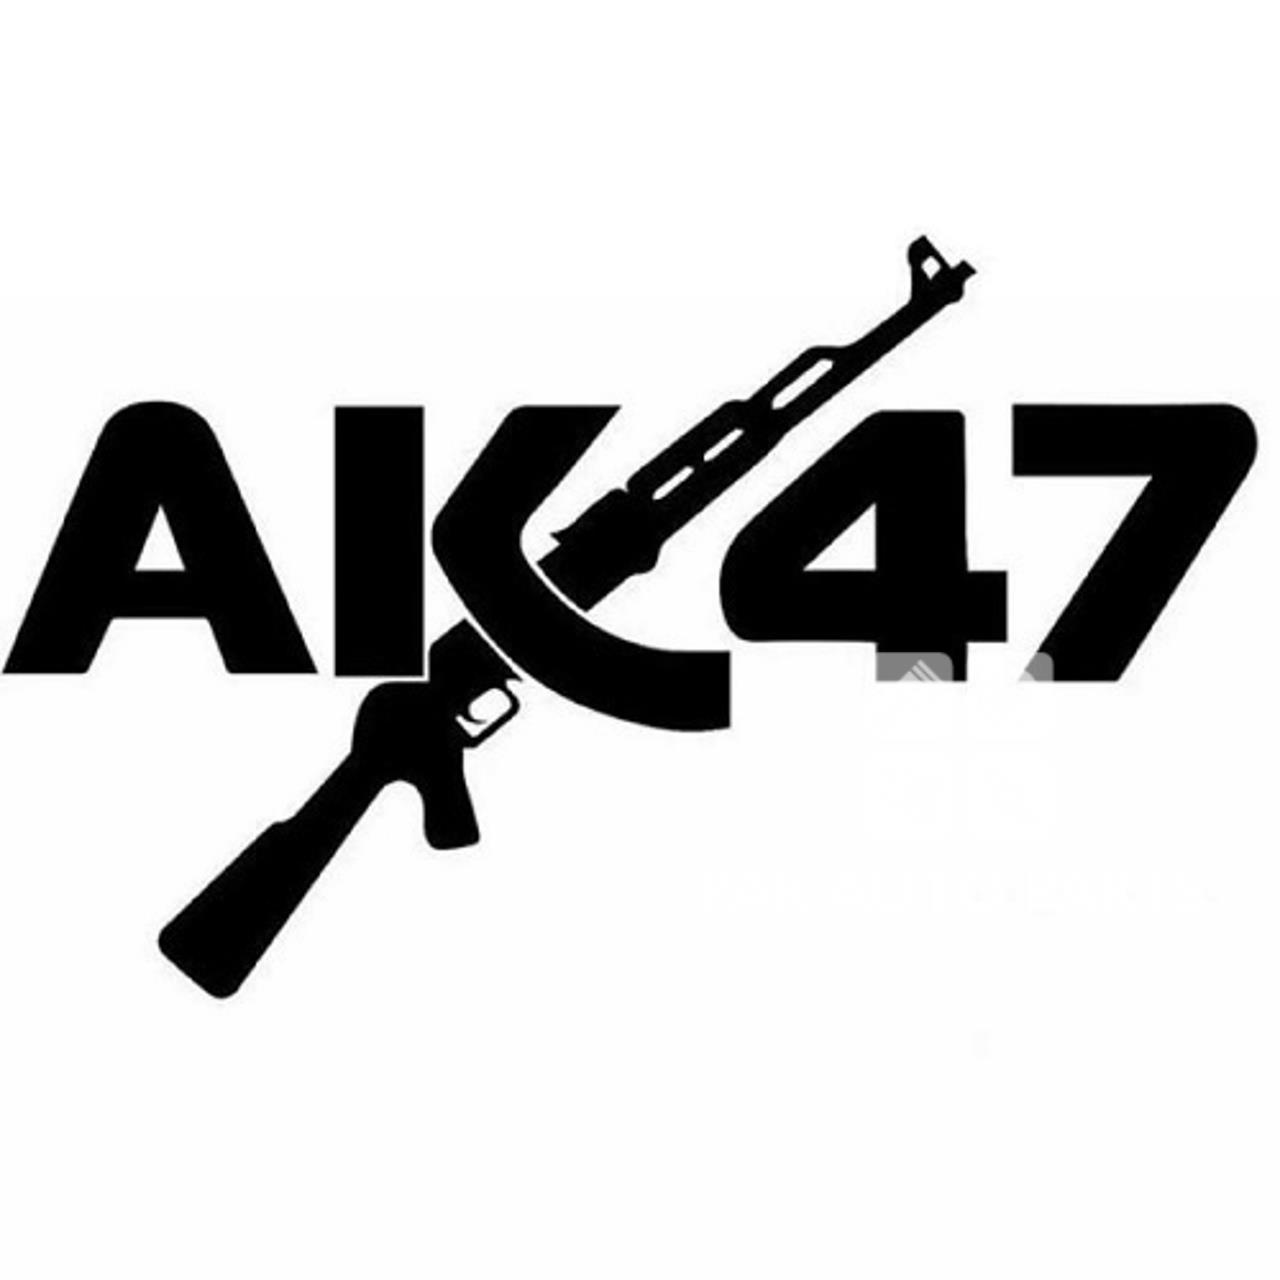 Picture of Car AK47 Sticker 4.5 X 4.5 Inches | Dual lamination | Waterproof / Weatherproof.